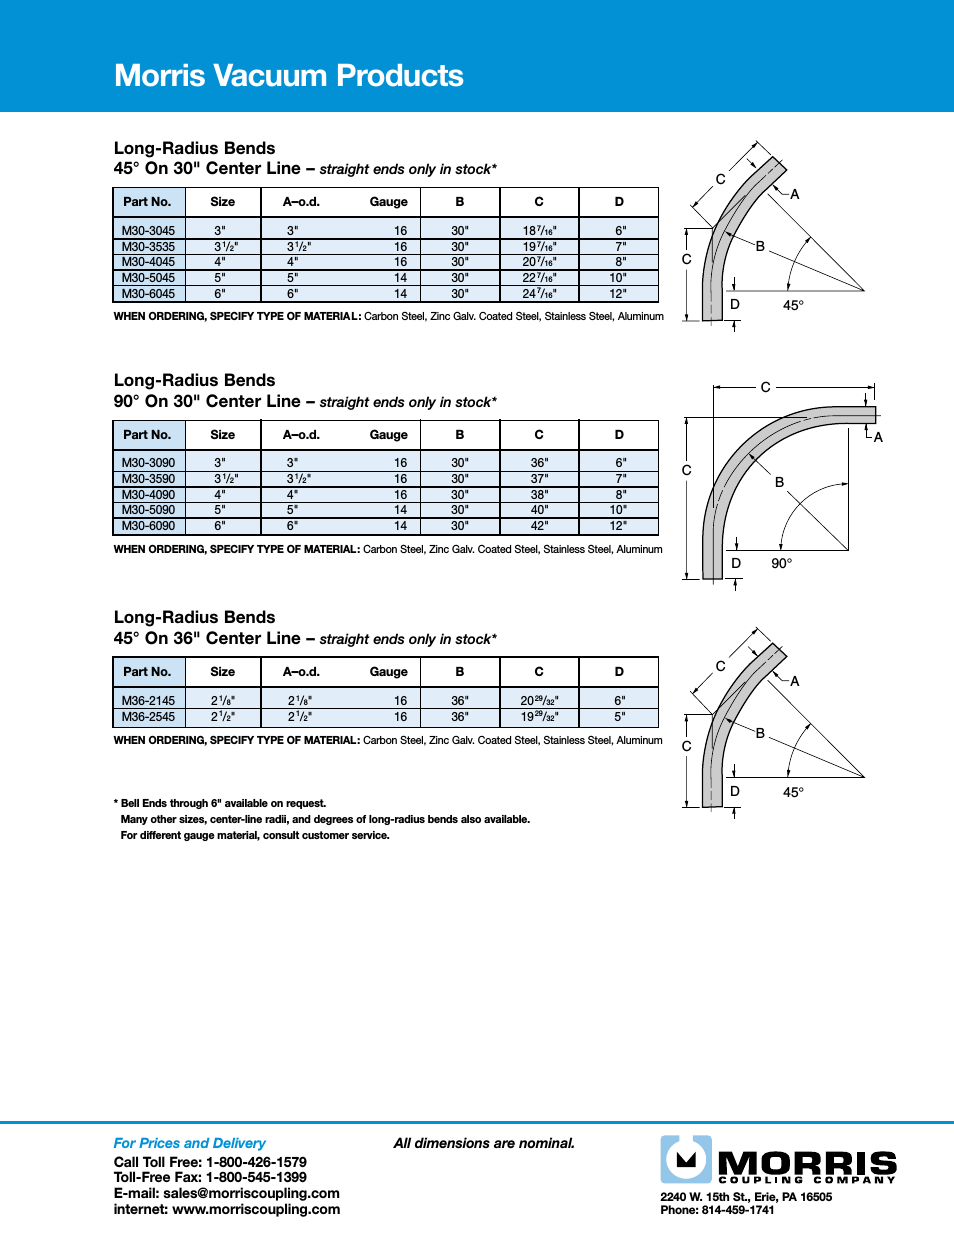 Vacuum Products - Long-Radius Bends 90 On 30 Center Line